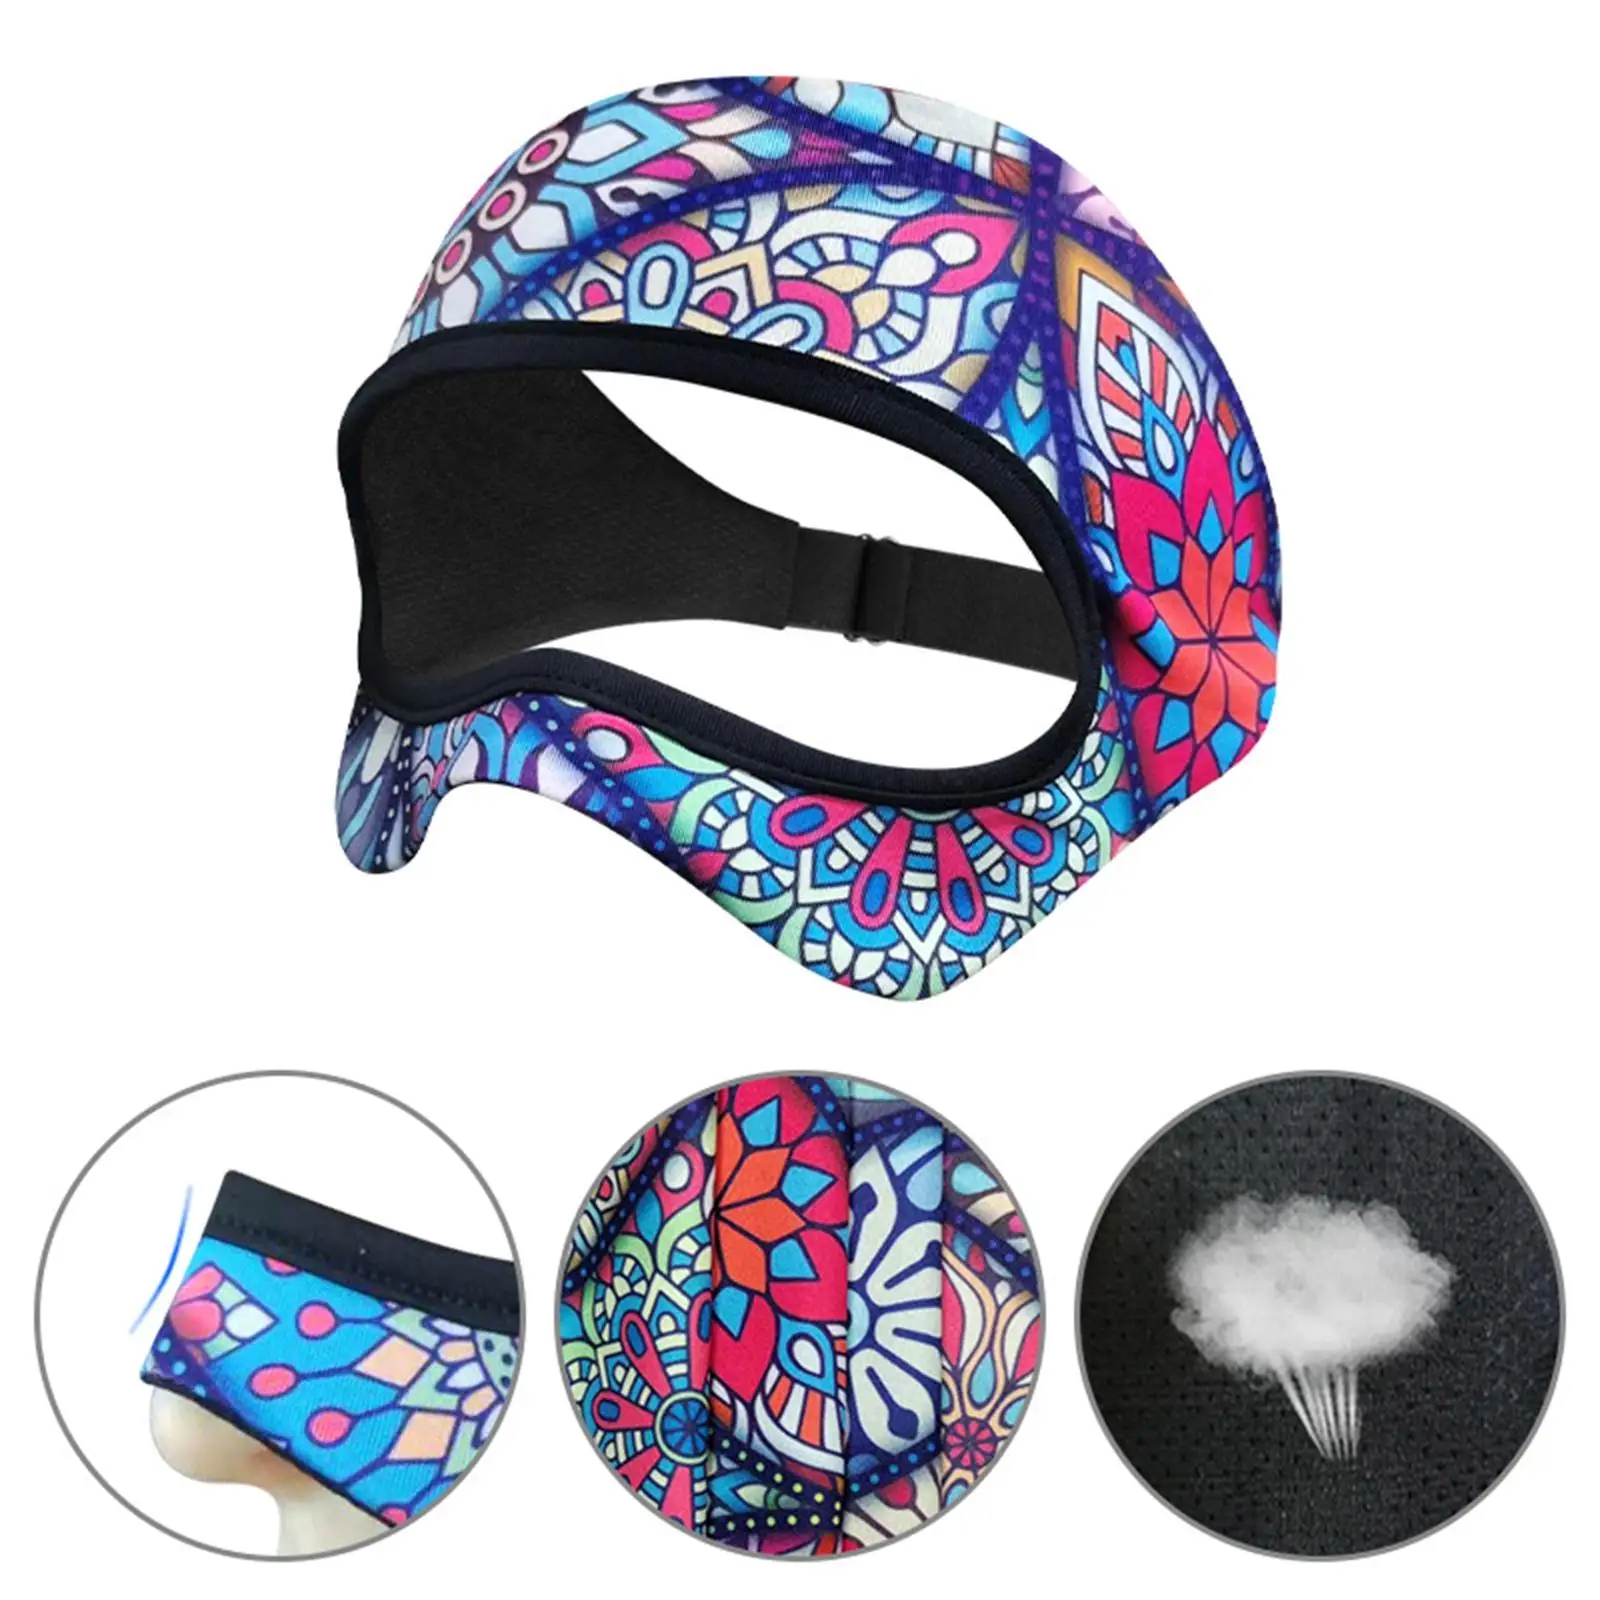 VR Eye Mask Cover Breathable Sweat Band Protective Washable sweat band Face Cover vr Workouts Supernatual Home